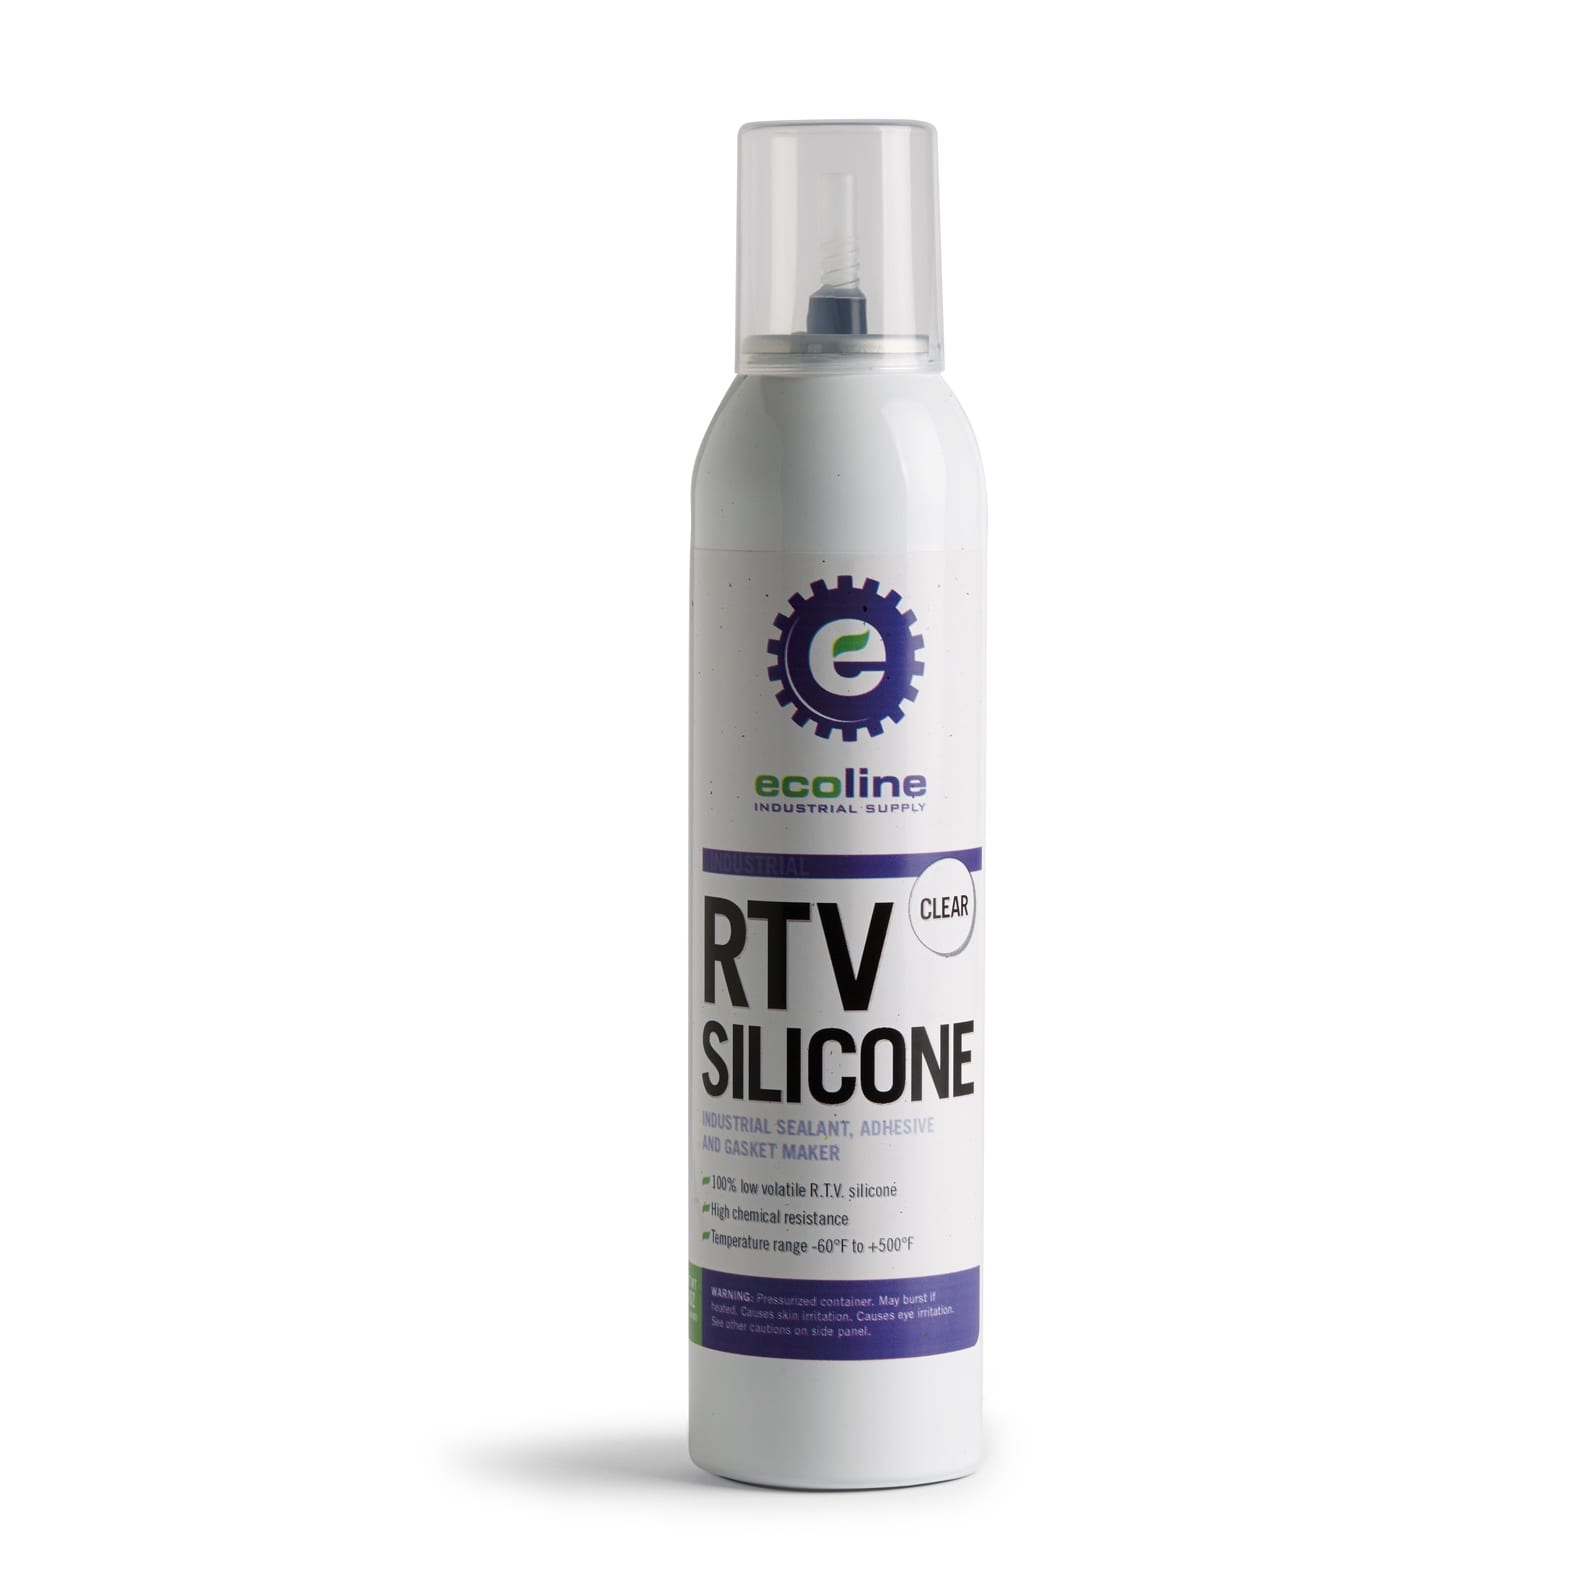 RTV Silicone Clear - Ecoline Industrial Supply